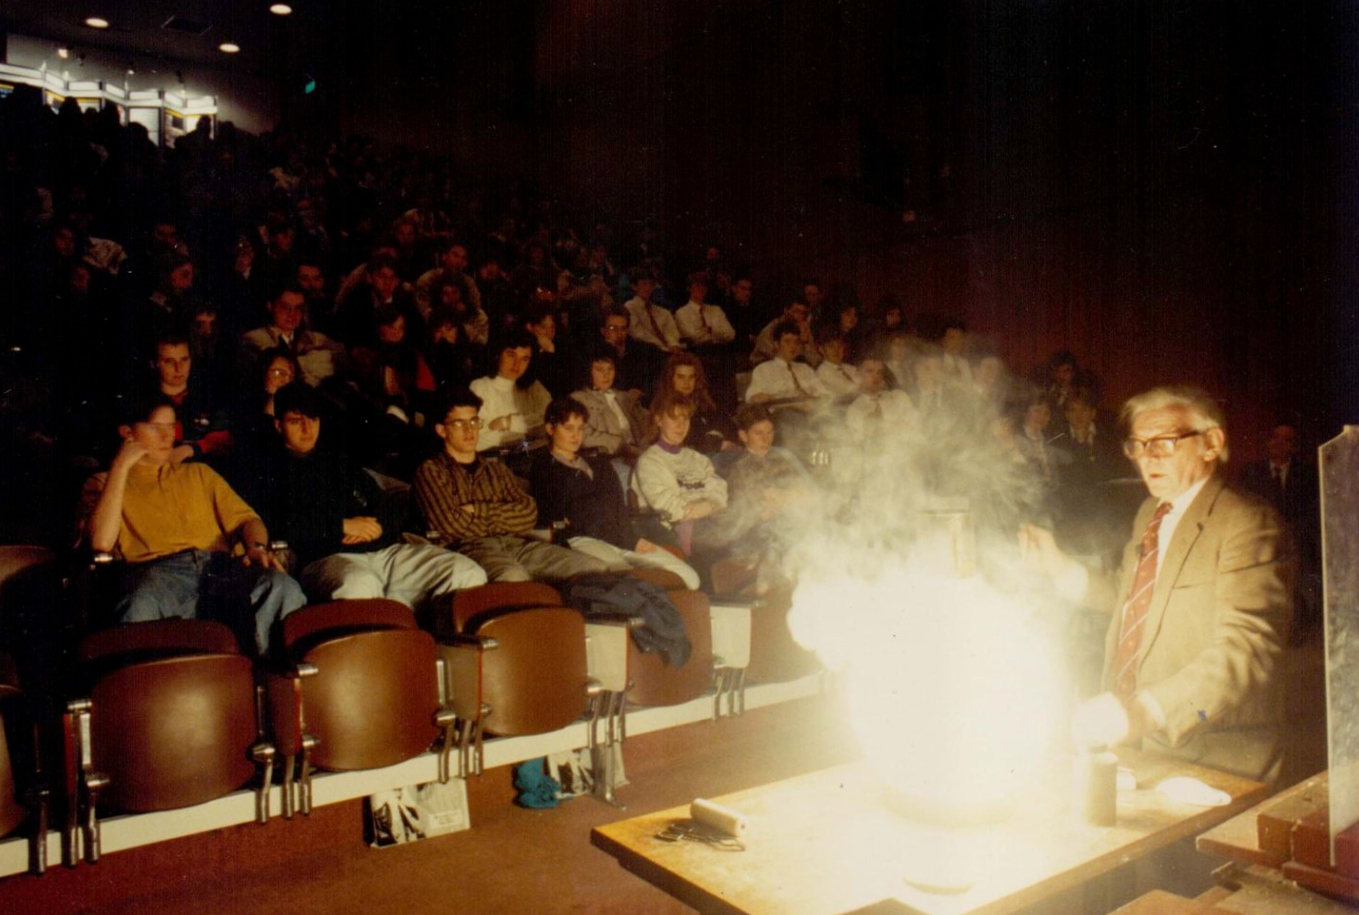 Dundee Institute of Technology Science Demonstration 1990